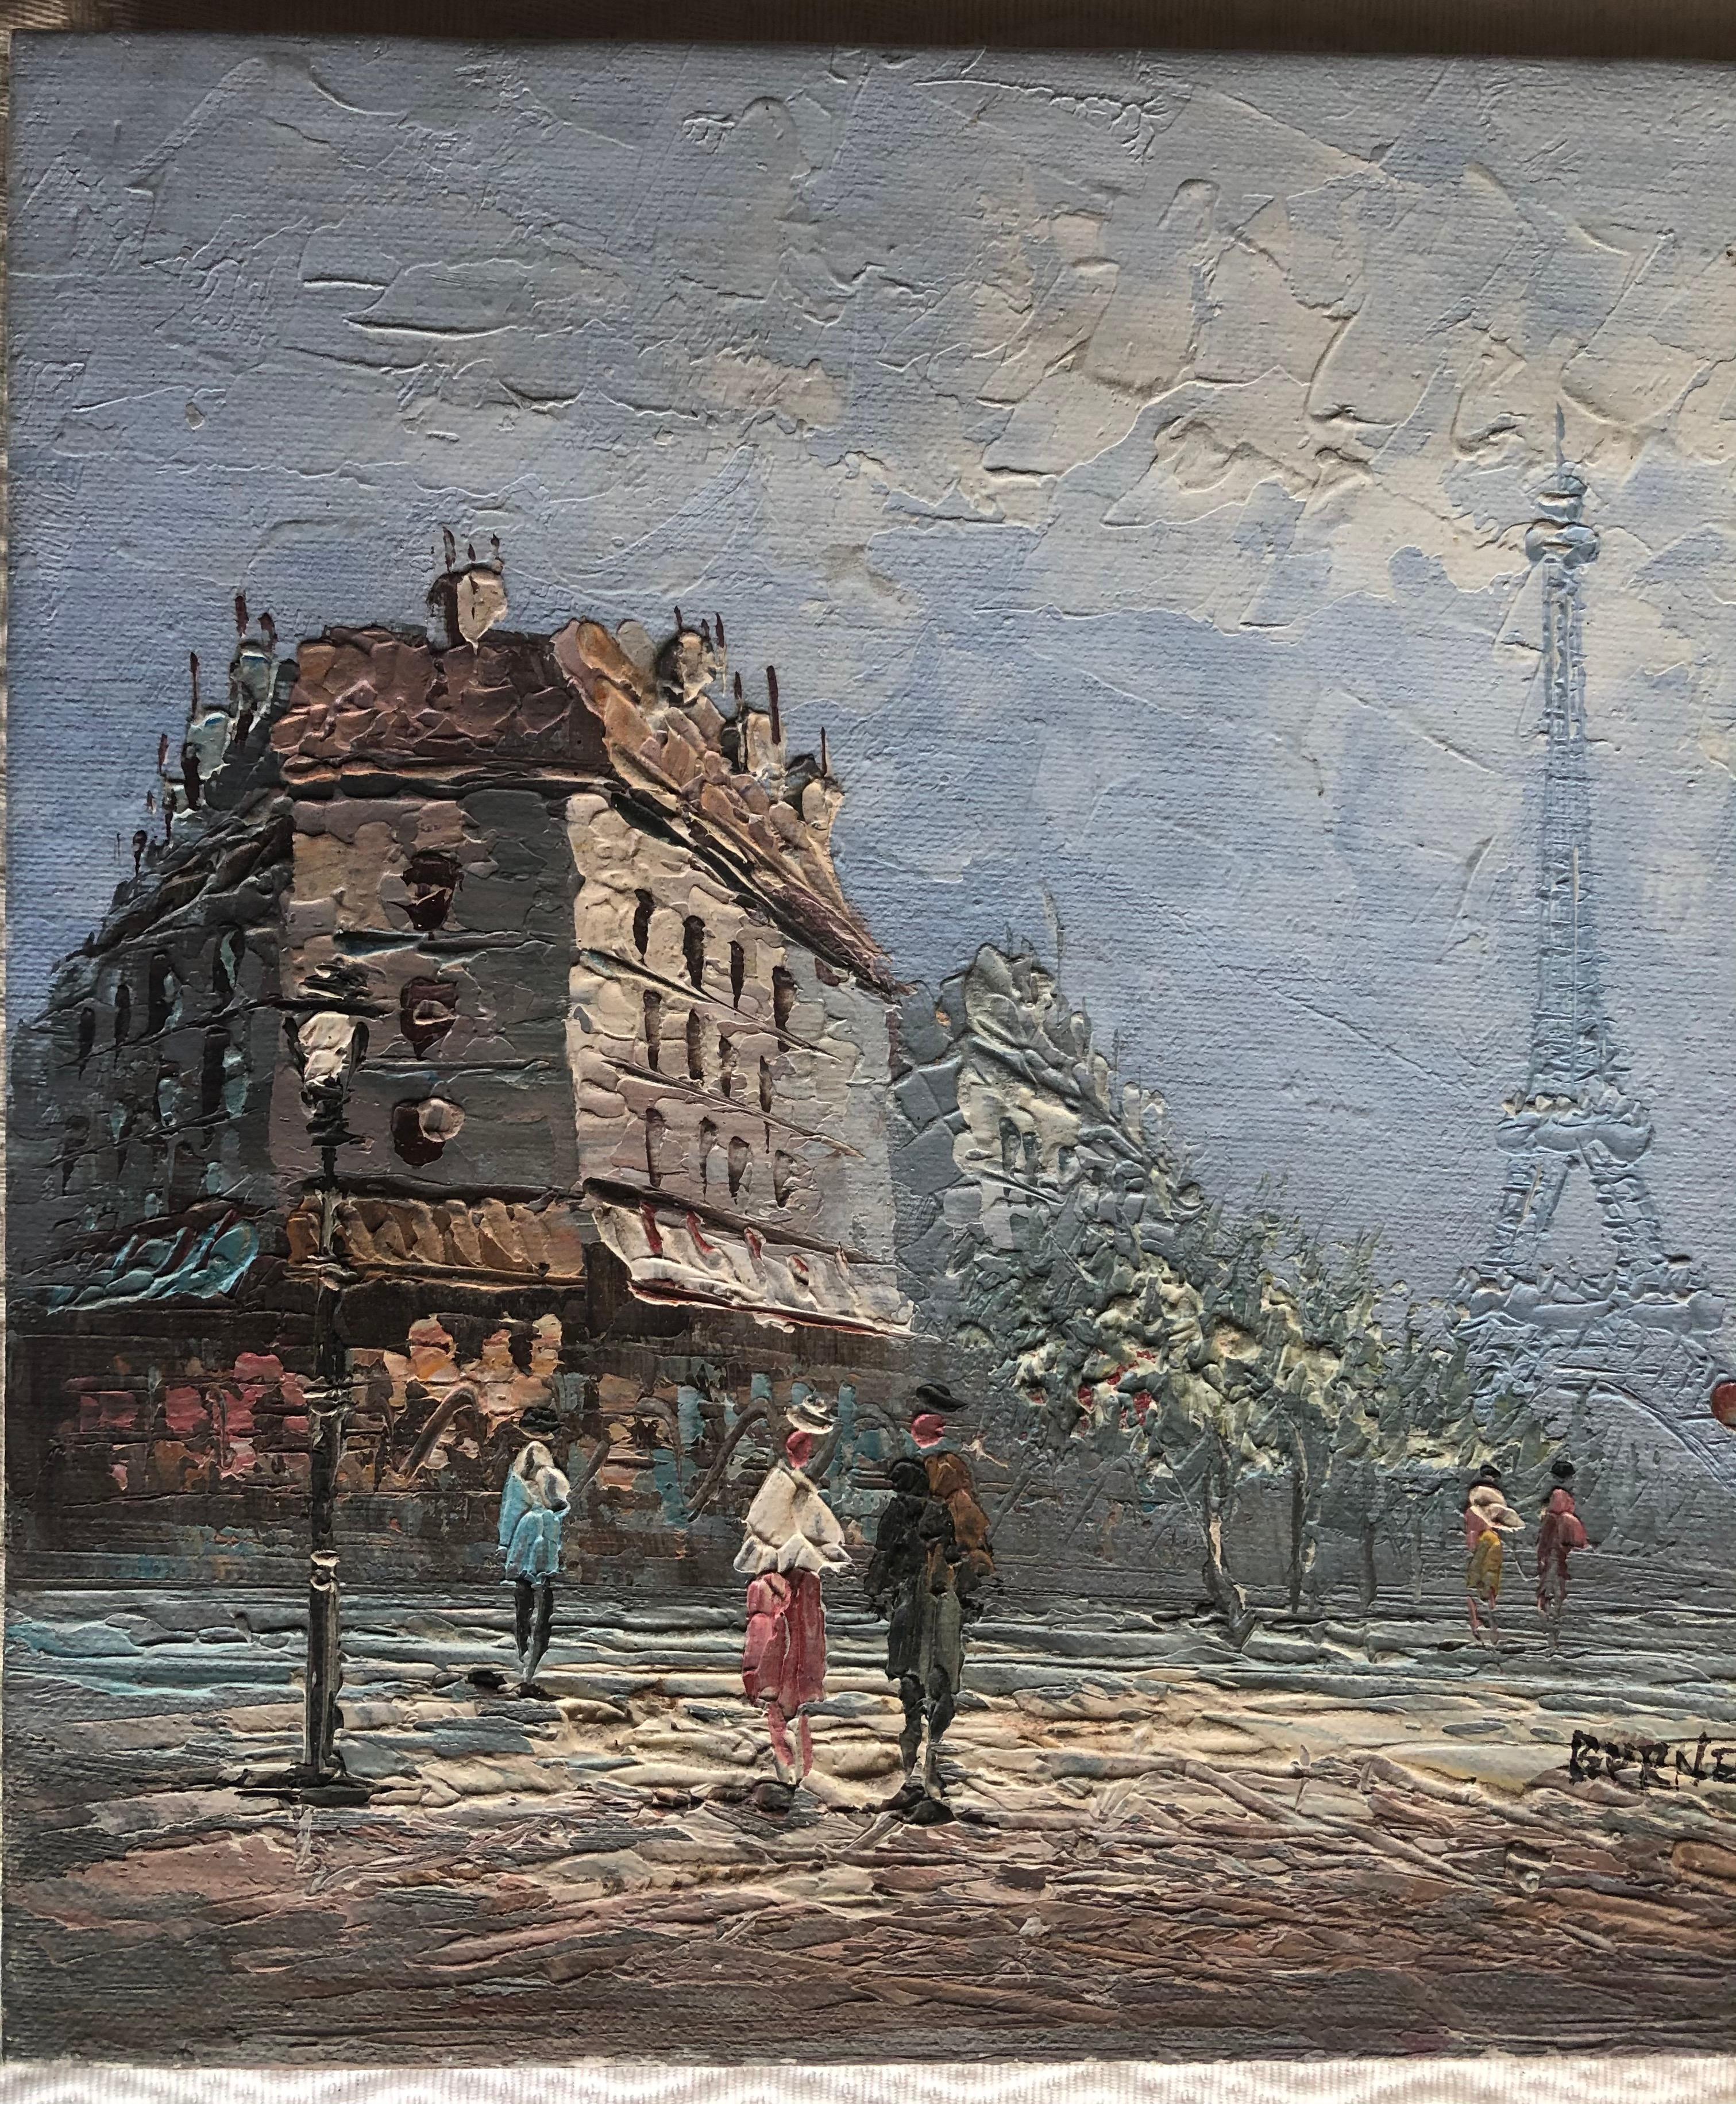 A beautiful view of a landscape or cityscape street scene in Paris, France with the Eiffel Tower in the background. This painting perfectly depicts life in Paris with its restaurants, busy streets, cafes, hotels, monuments, and wonderful